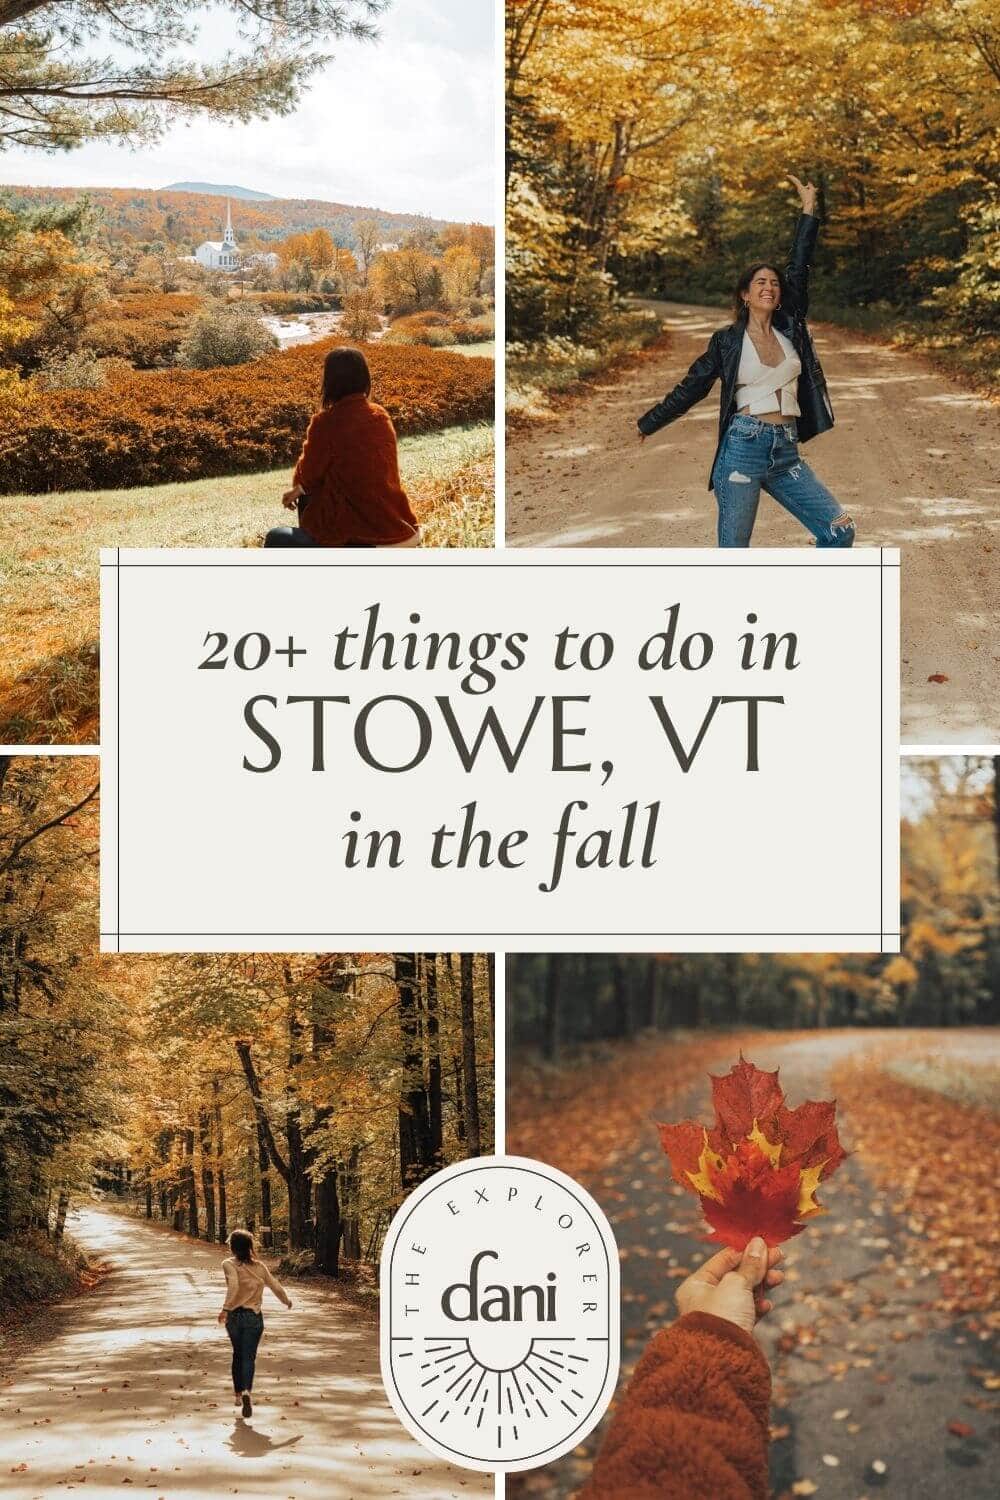 20+ Things to do in Stowe, VT in the Fall